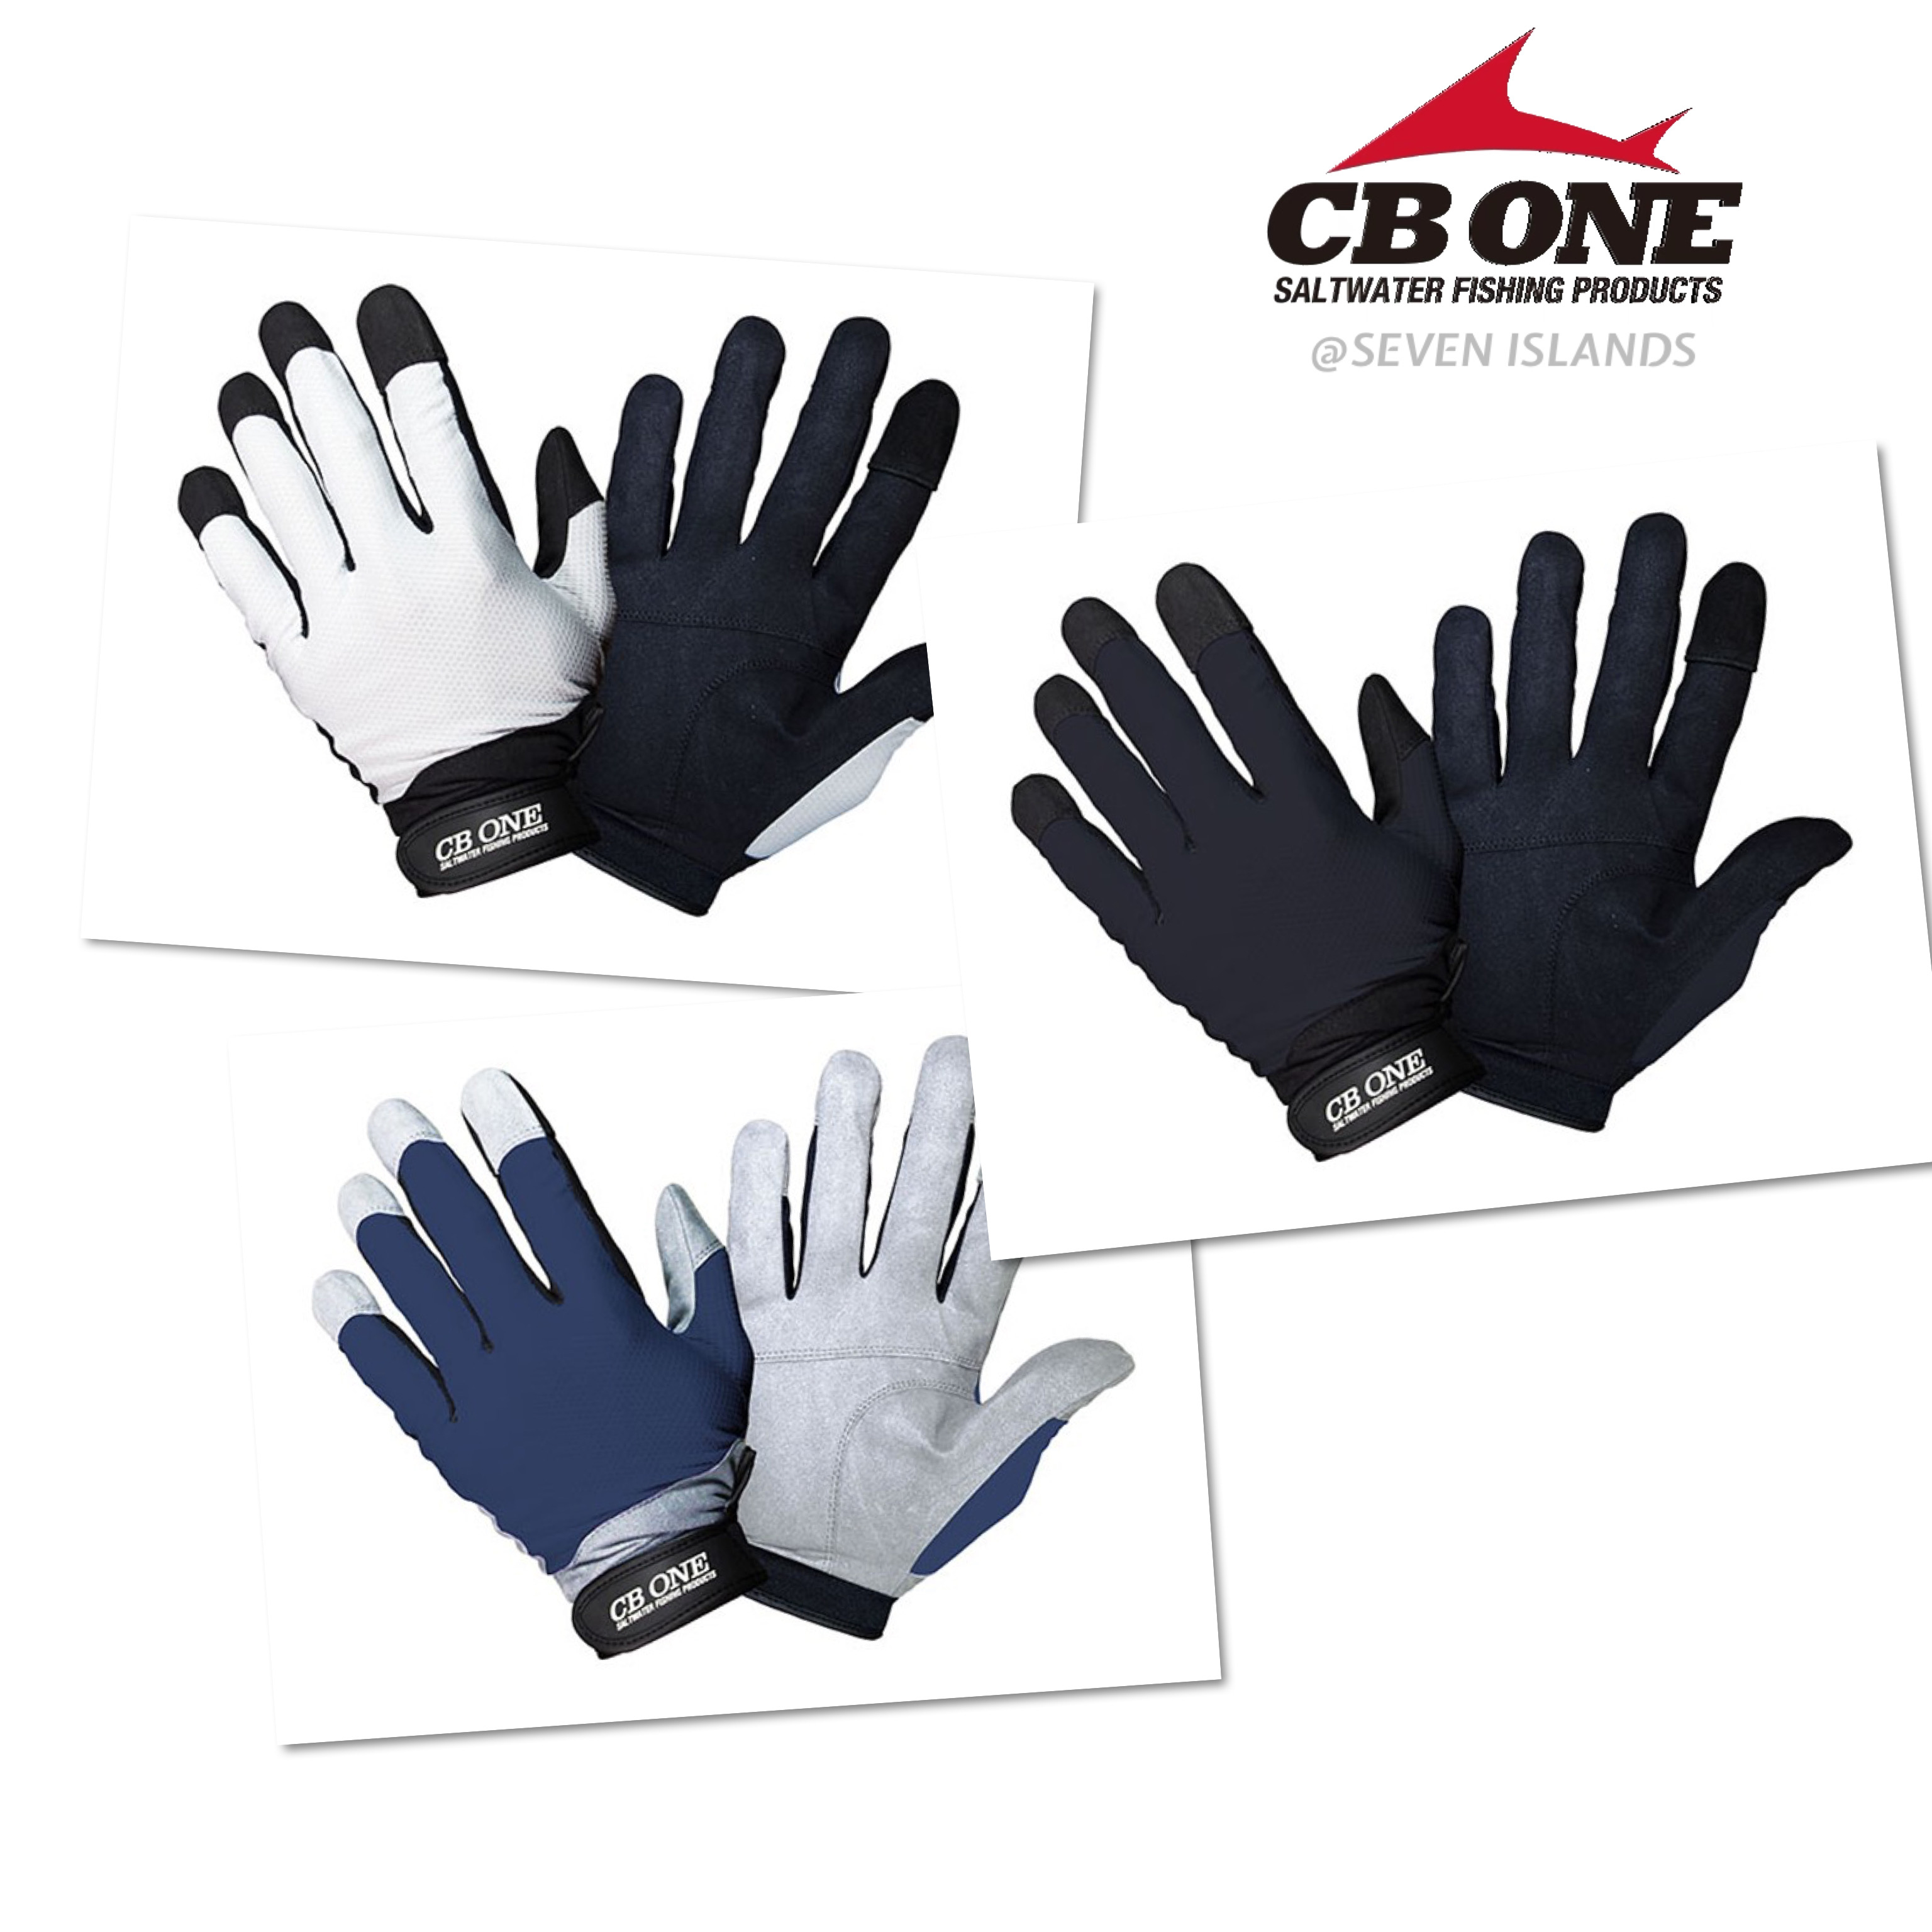 CB ONE OFFSHORE GAMING GLOVES